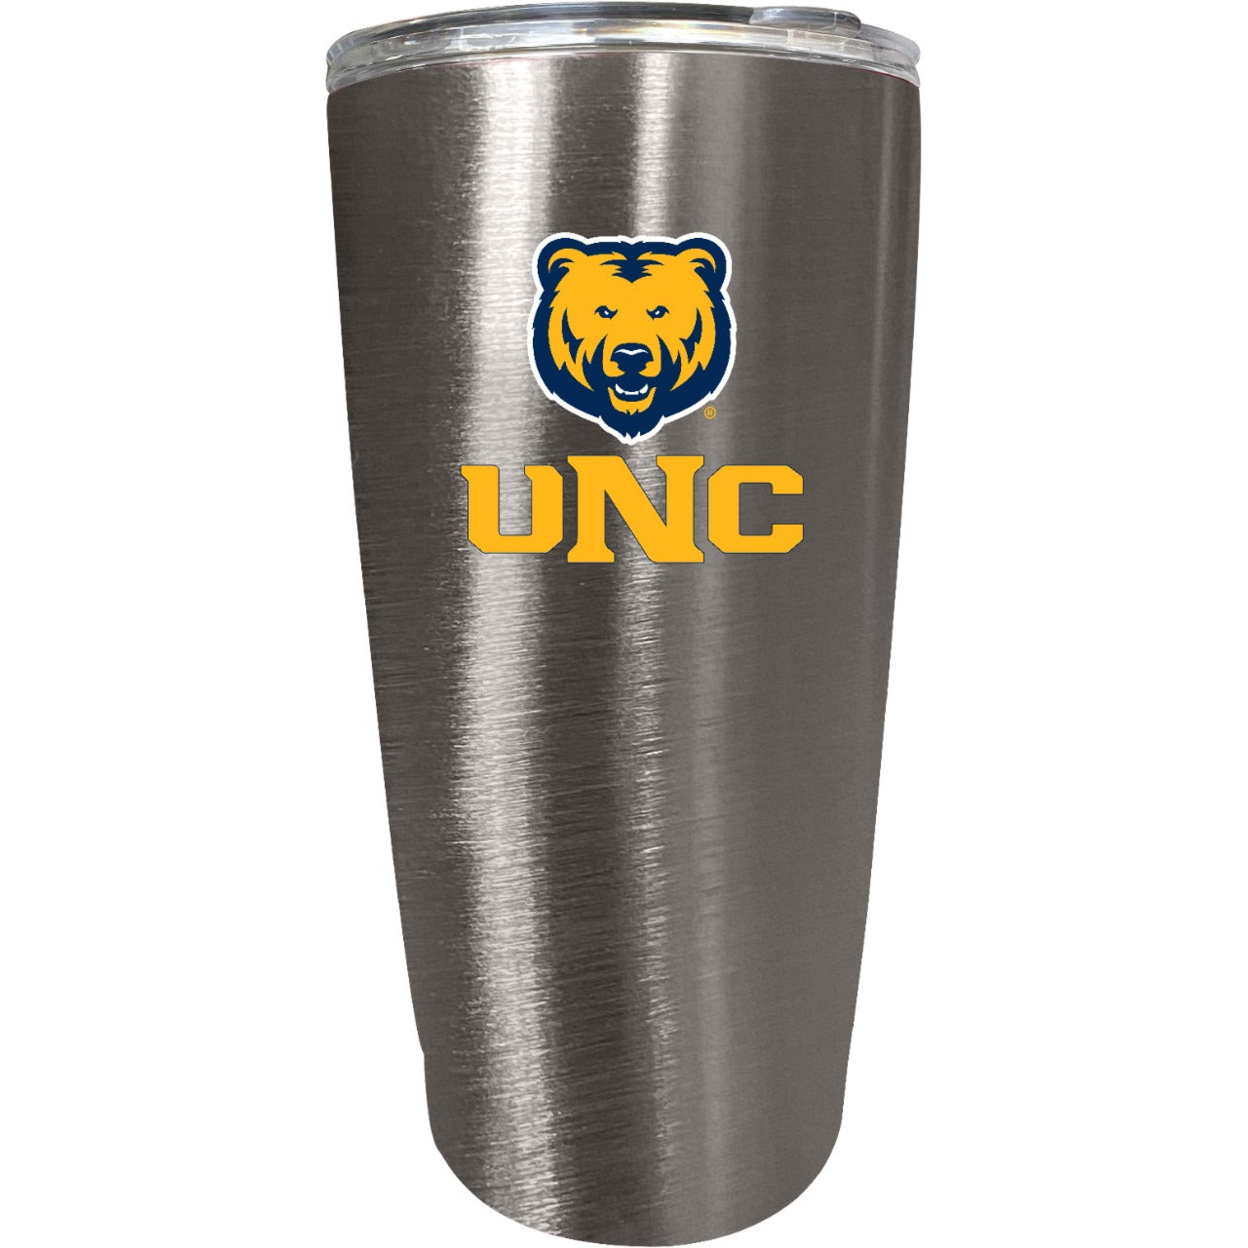 Northern Colorado Bears 16 Oz Insulated Stainless Steel Tumbler Colorless